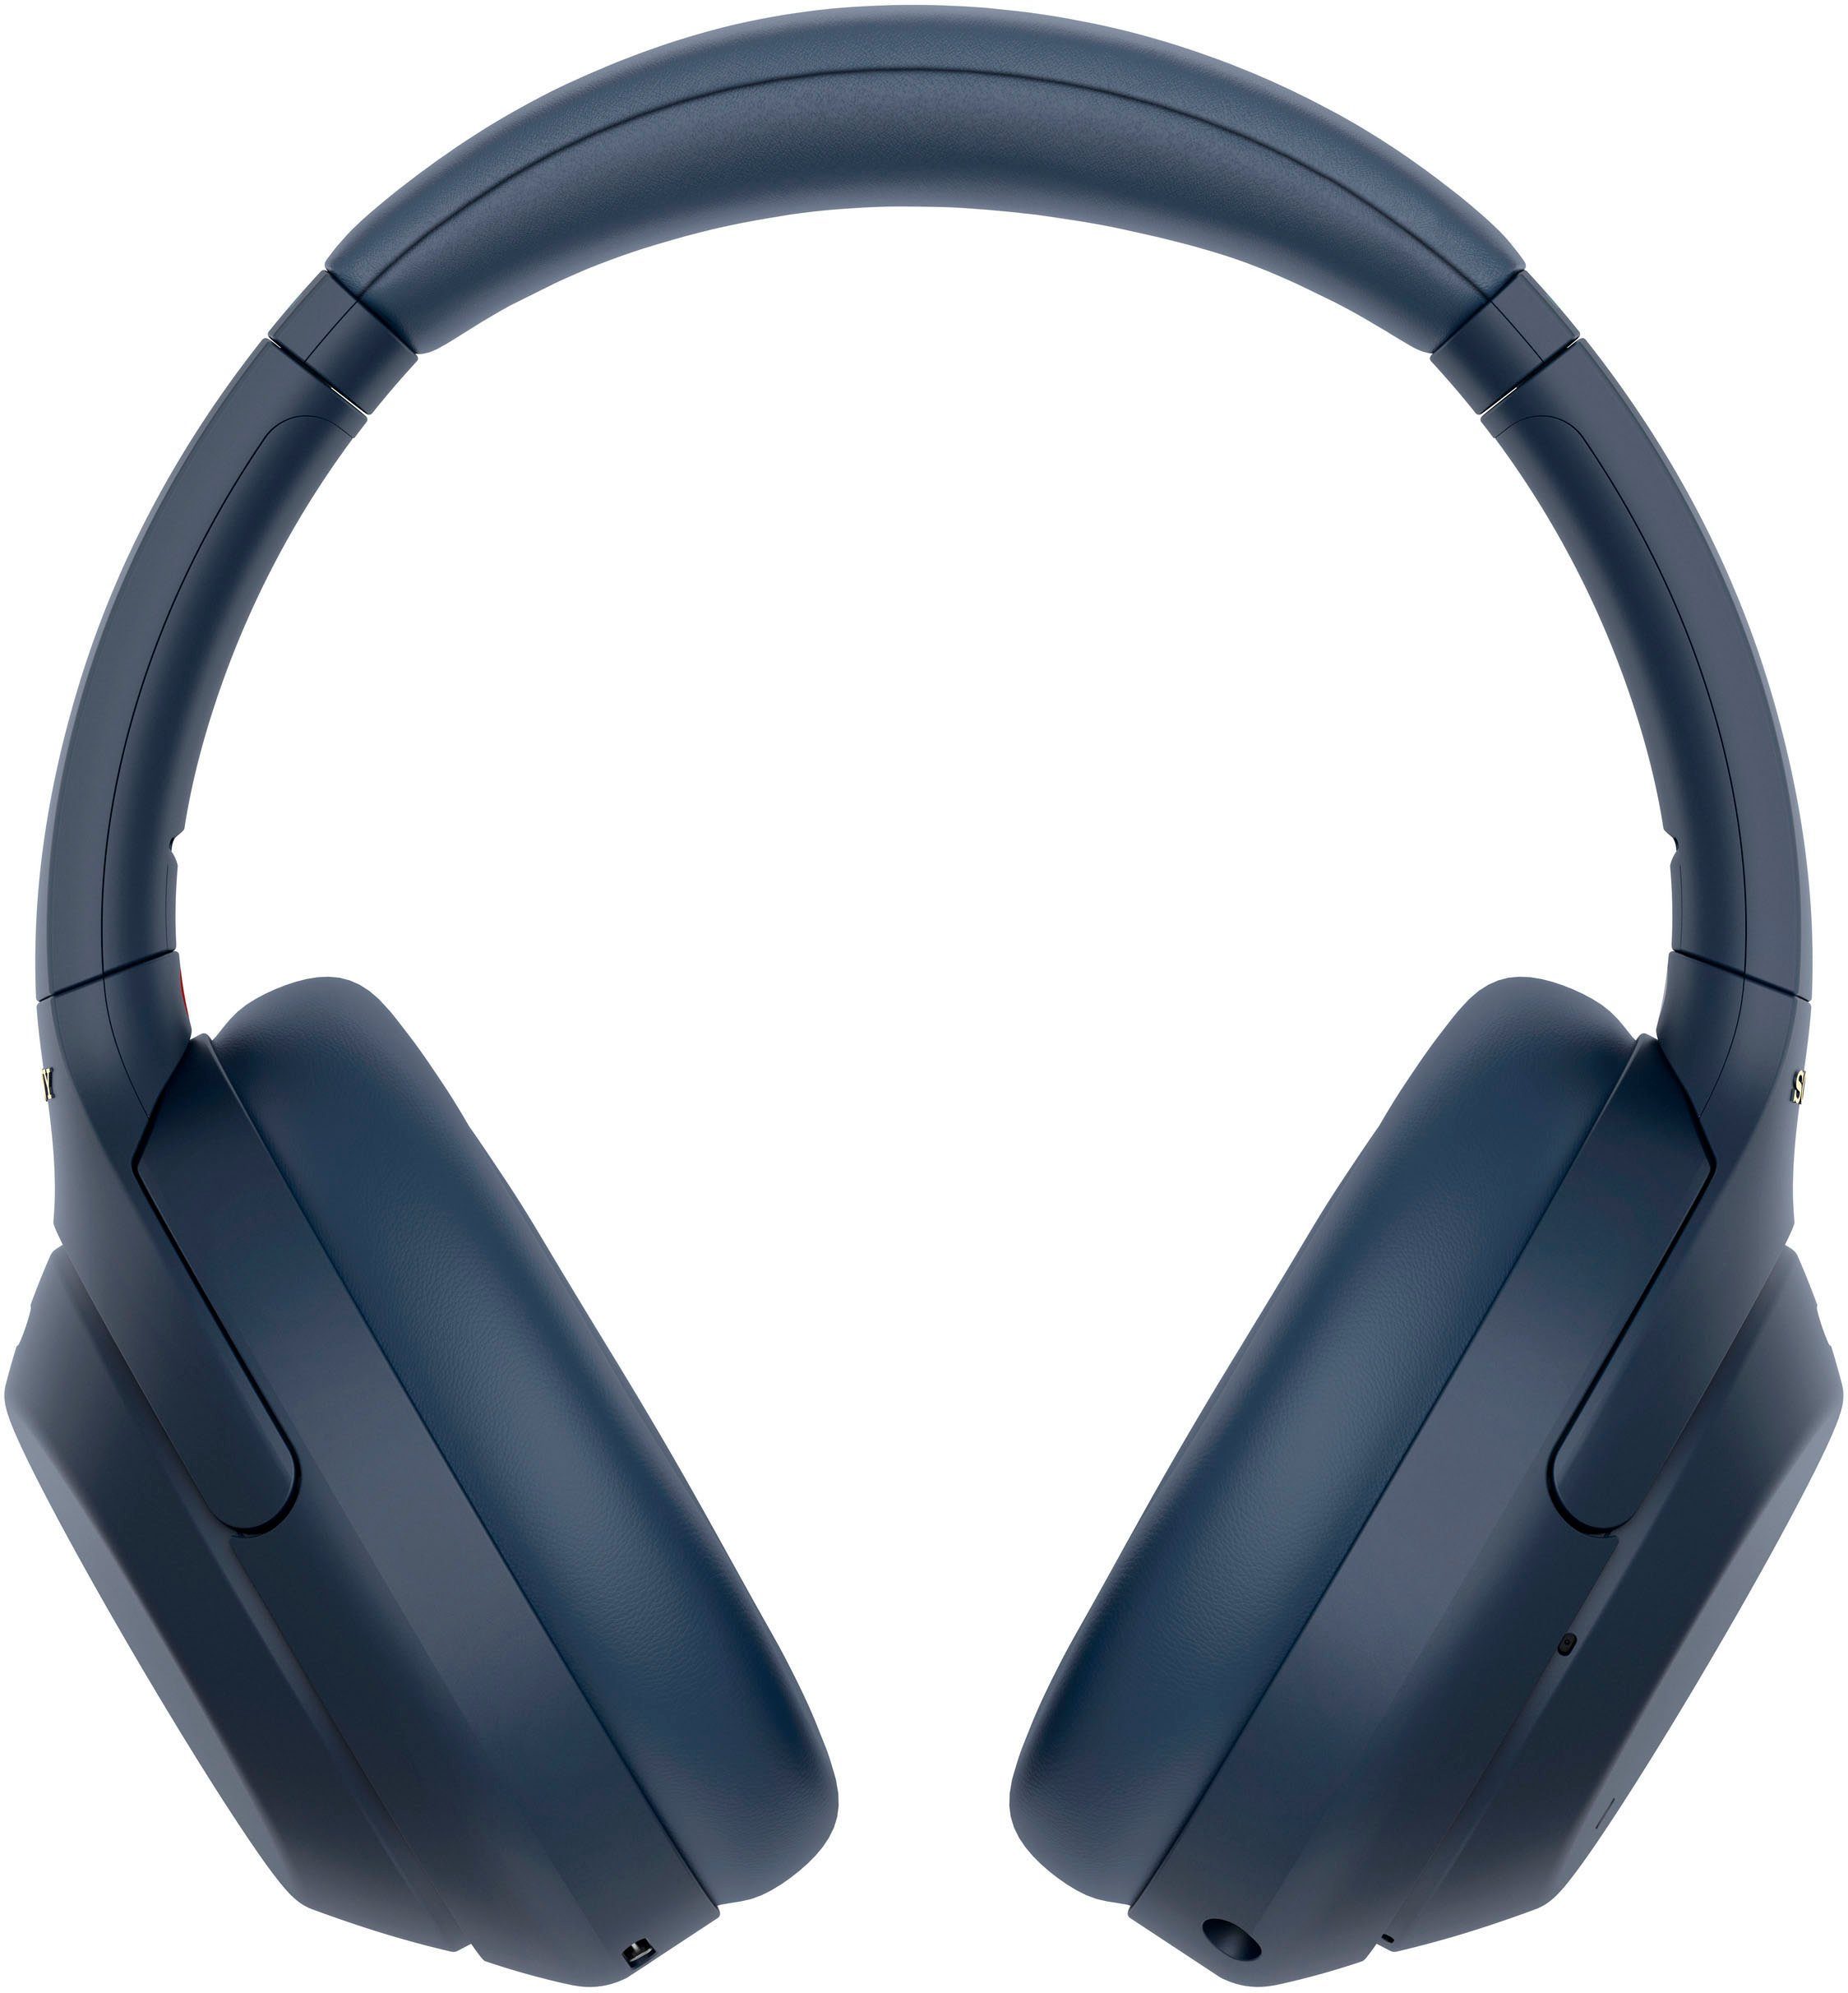 Sony WH-1000XM4 kabelloser Over-Ear-Kopfhörer Sensor, NFC, Bluetooth, Touch One-Touch NFC, Verbindung (Noise-Cancelling, via Schnellladefunktion) blau